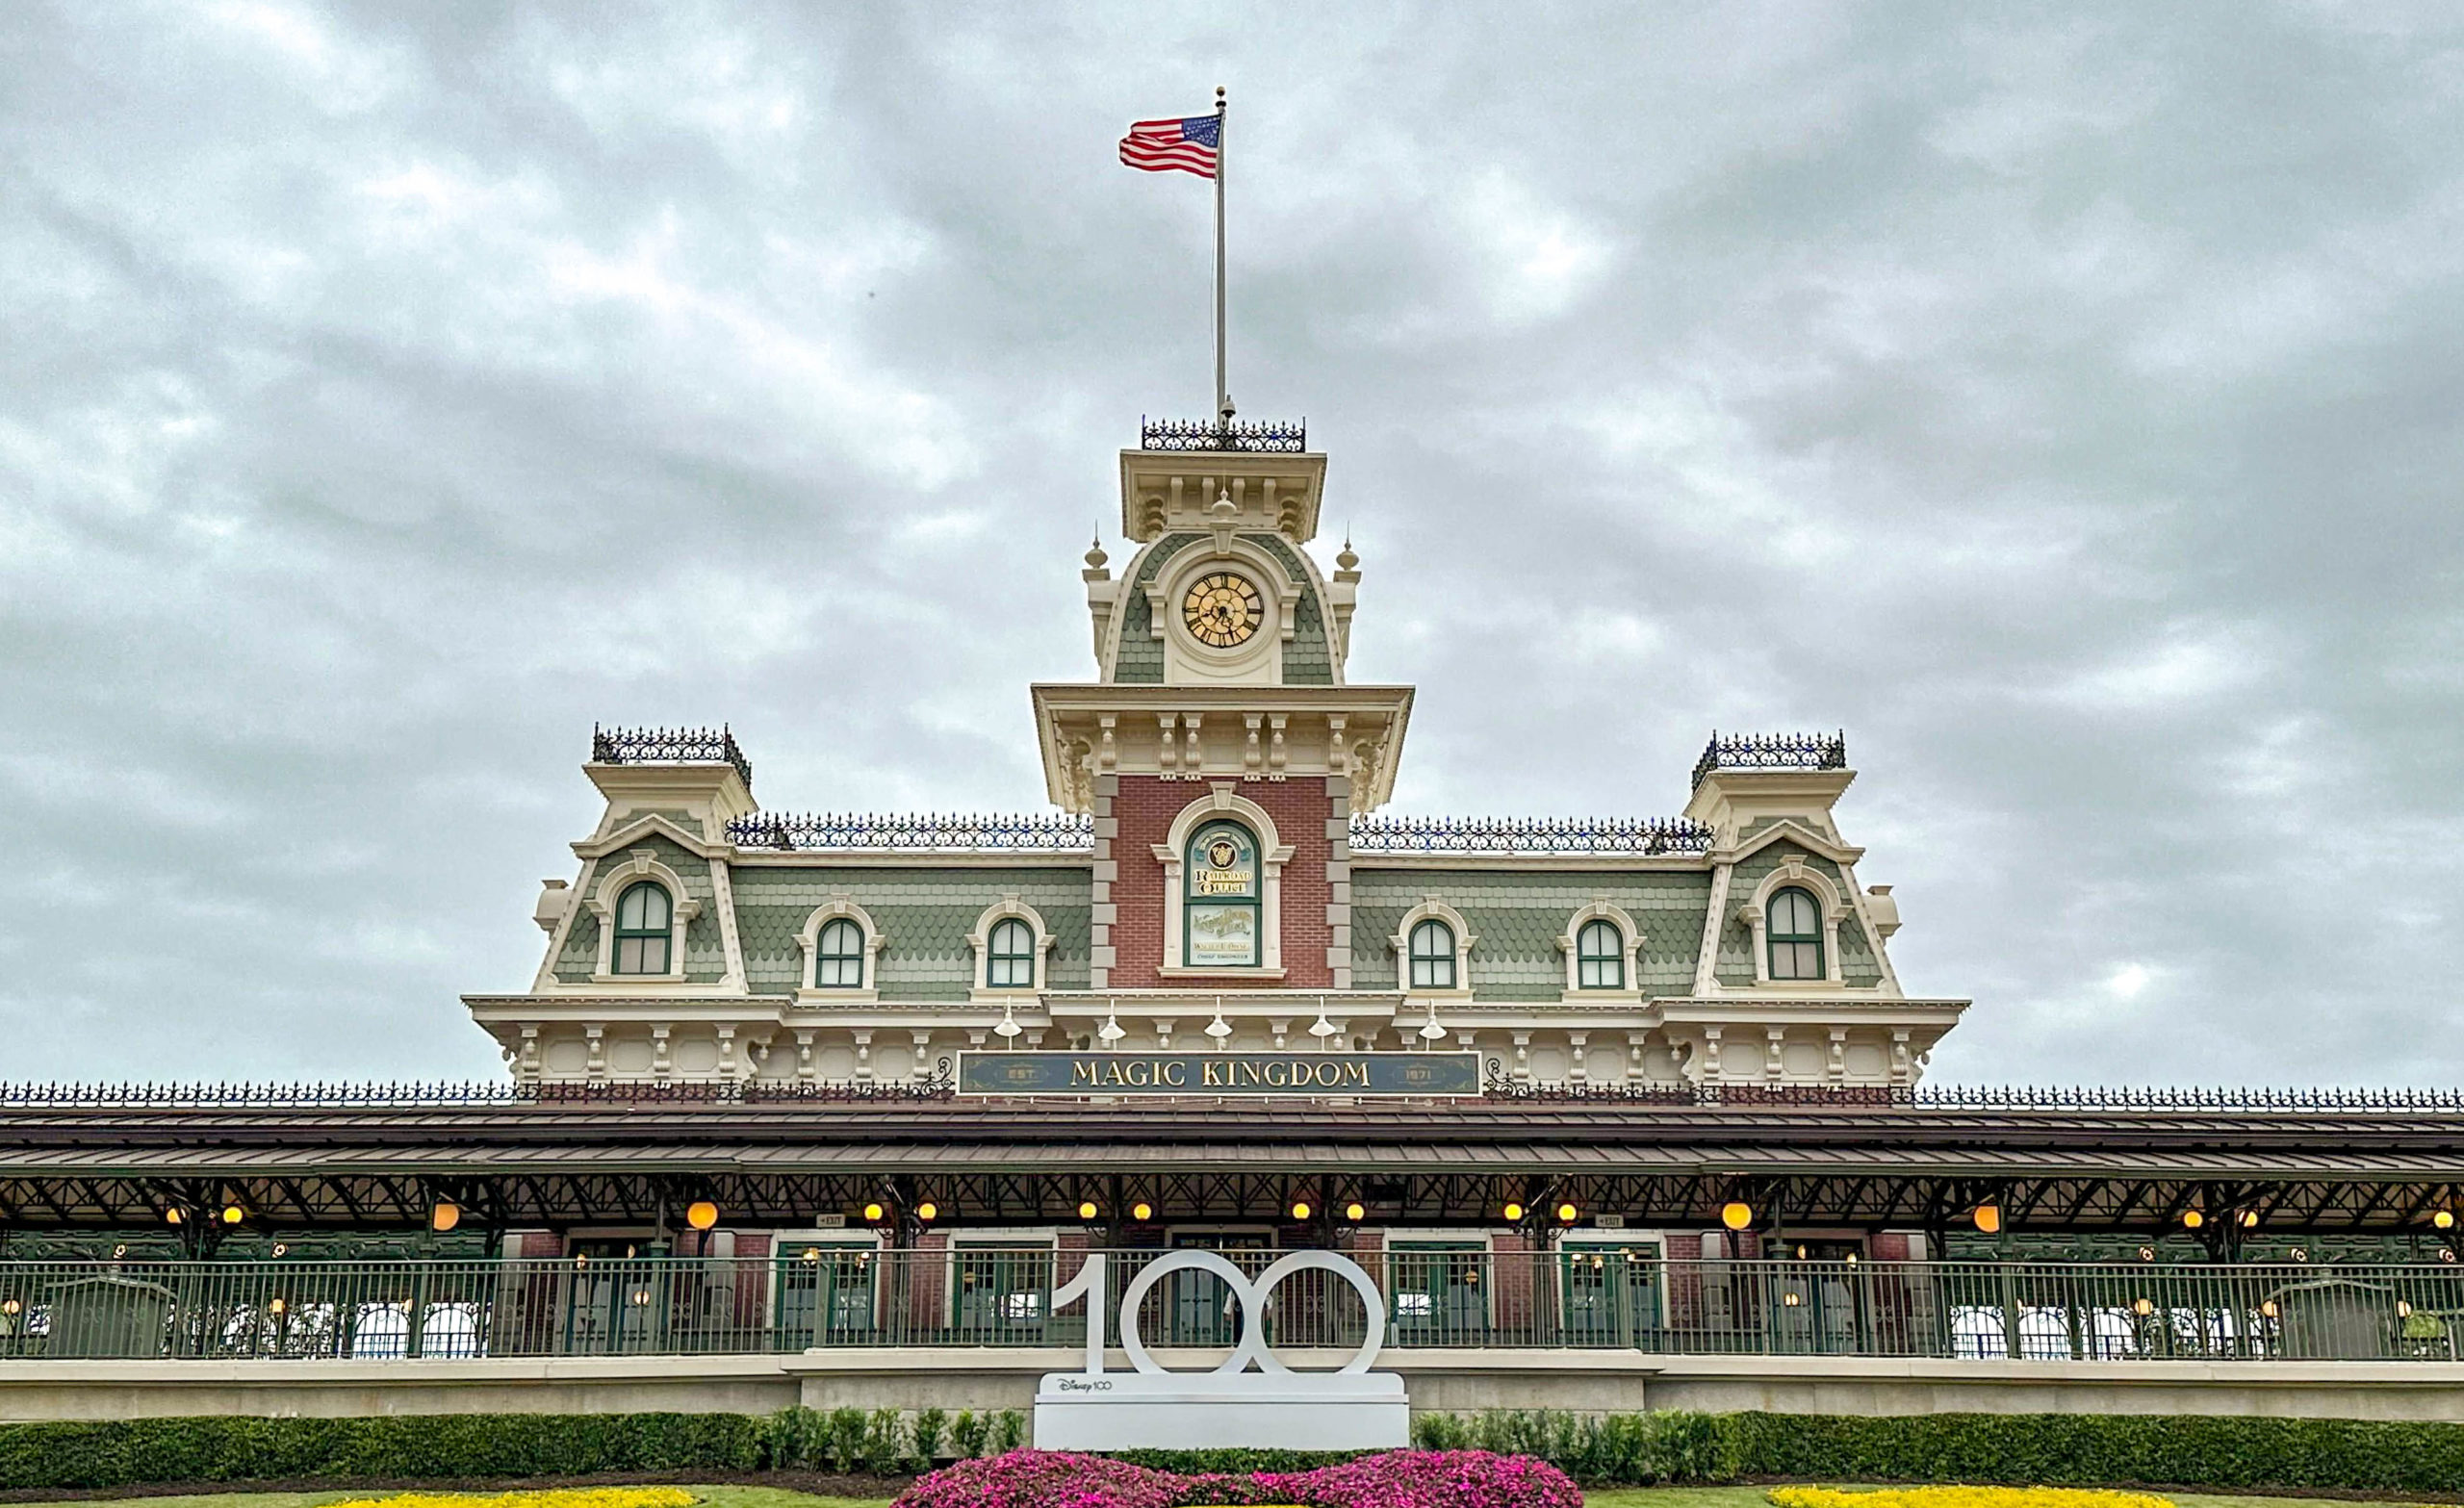 BREAKING Magic Kingdom's Entrance Decor Has Been UPDATED